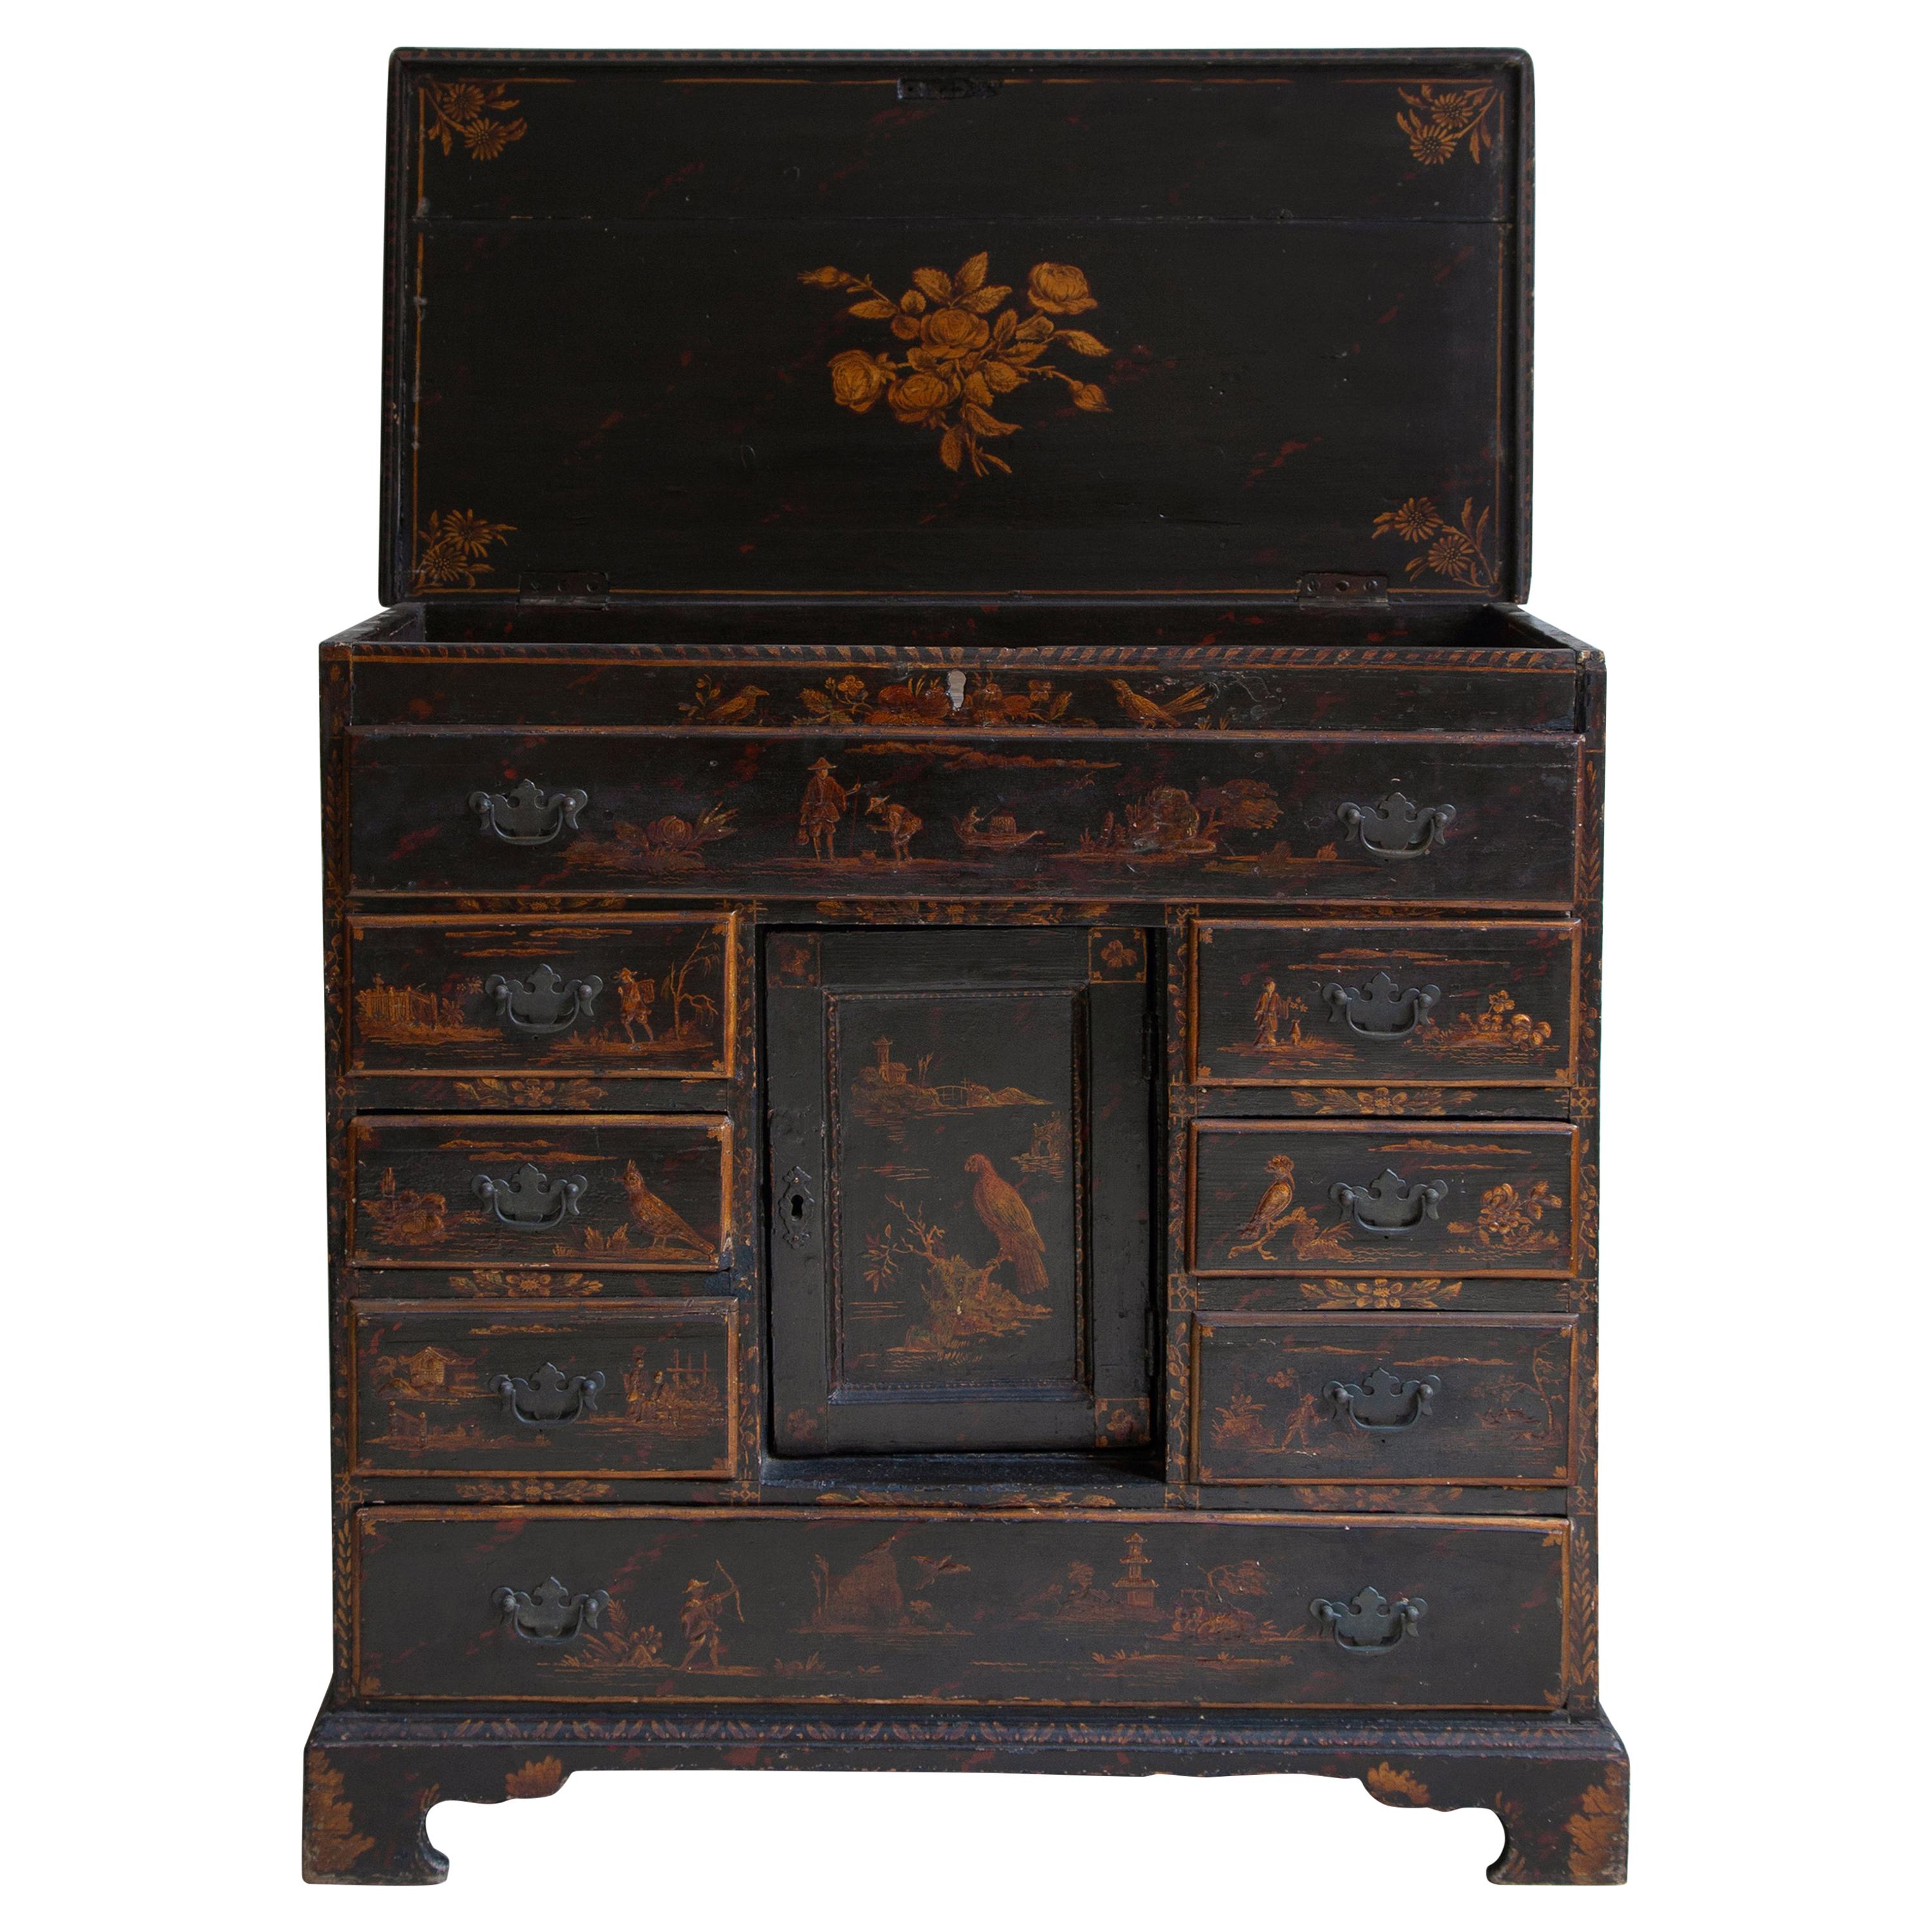 18th Century English Wood Chest with Chinoiserie and Floral Motifs